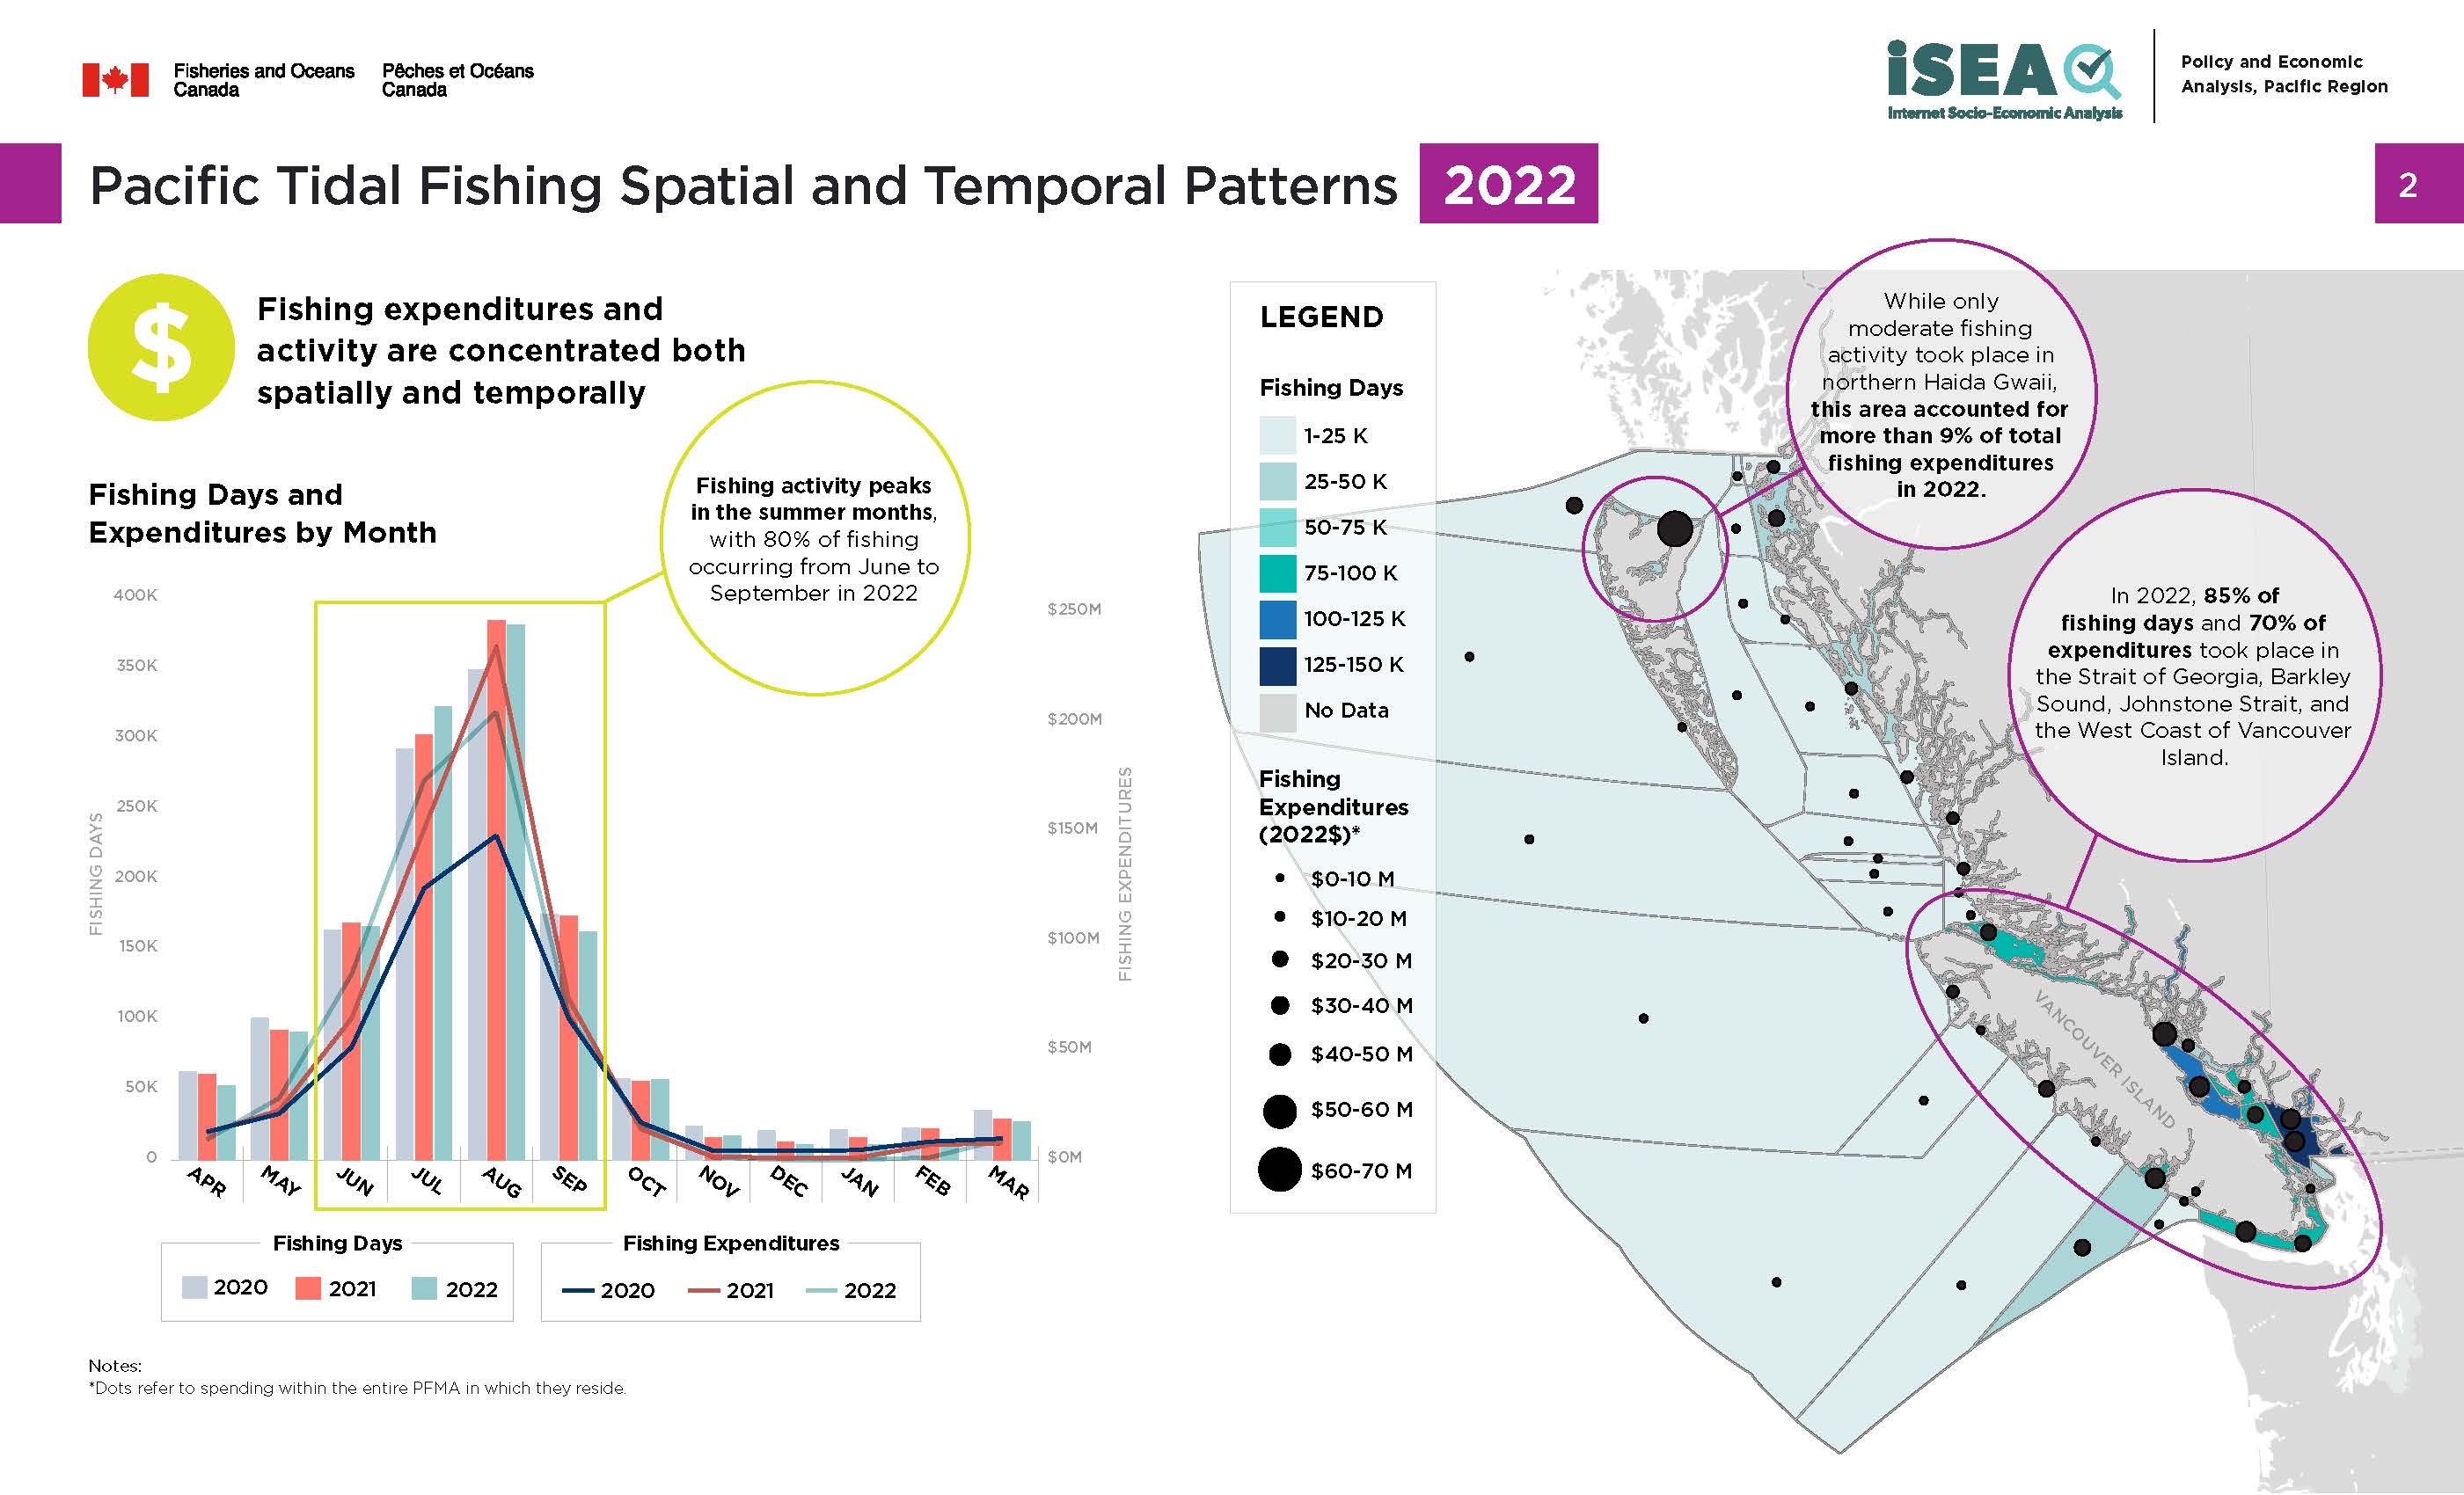 Photo: infographic of Pacific tidal fishing spatial and temporal patterns, 2022